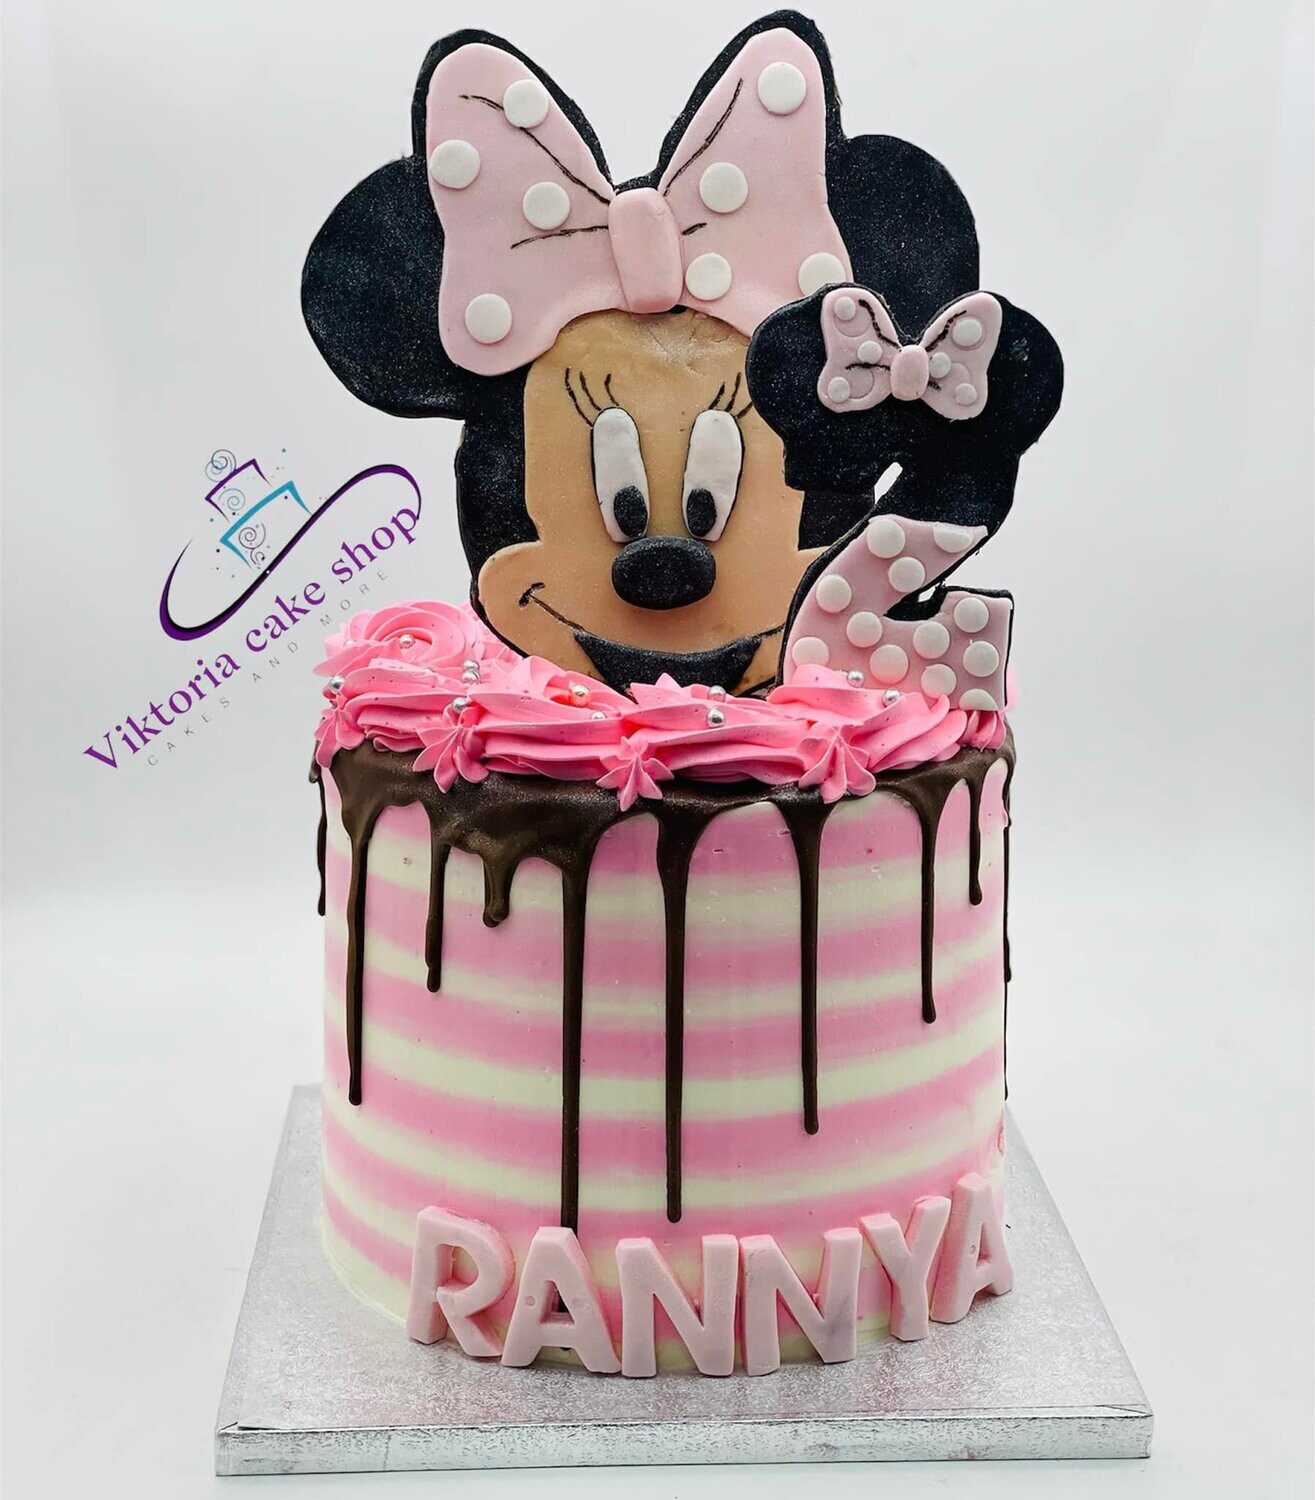 Minnie Mouse Cake | Minnie mouse cake, Mouse cake, Minnie mouse party